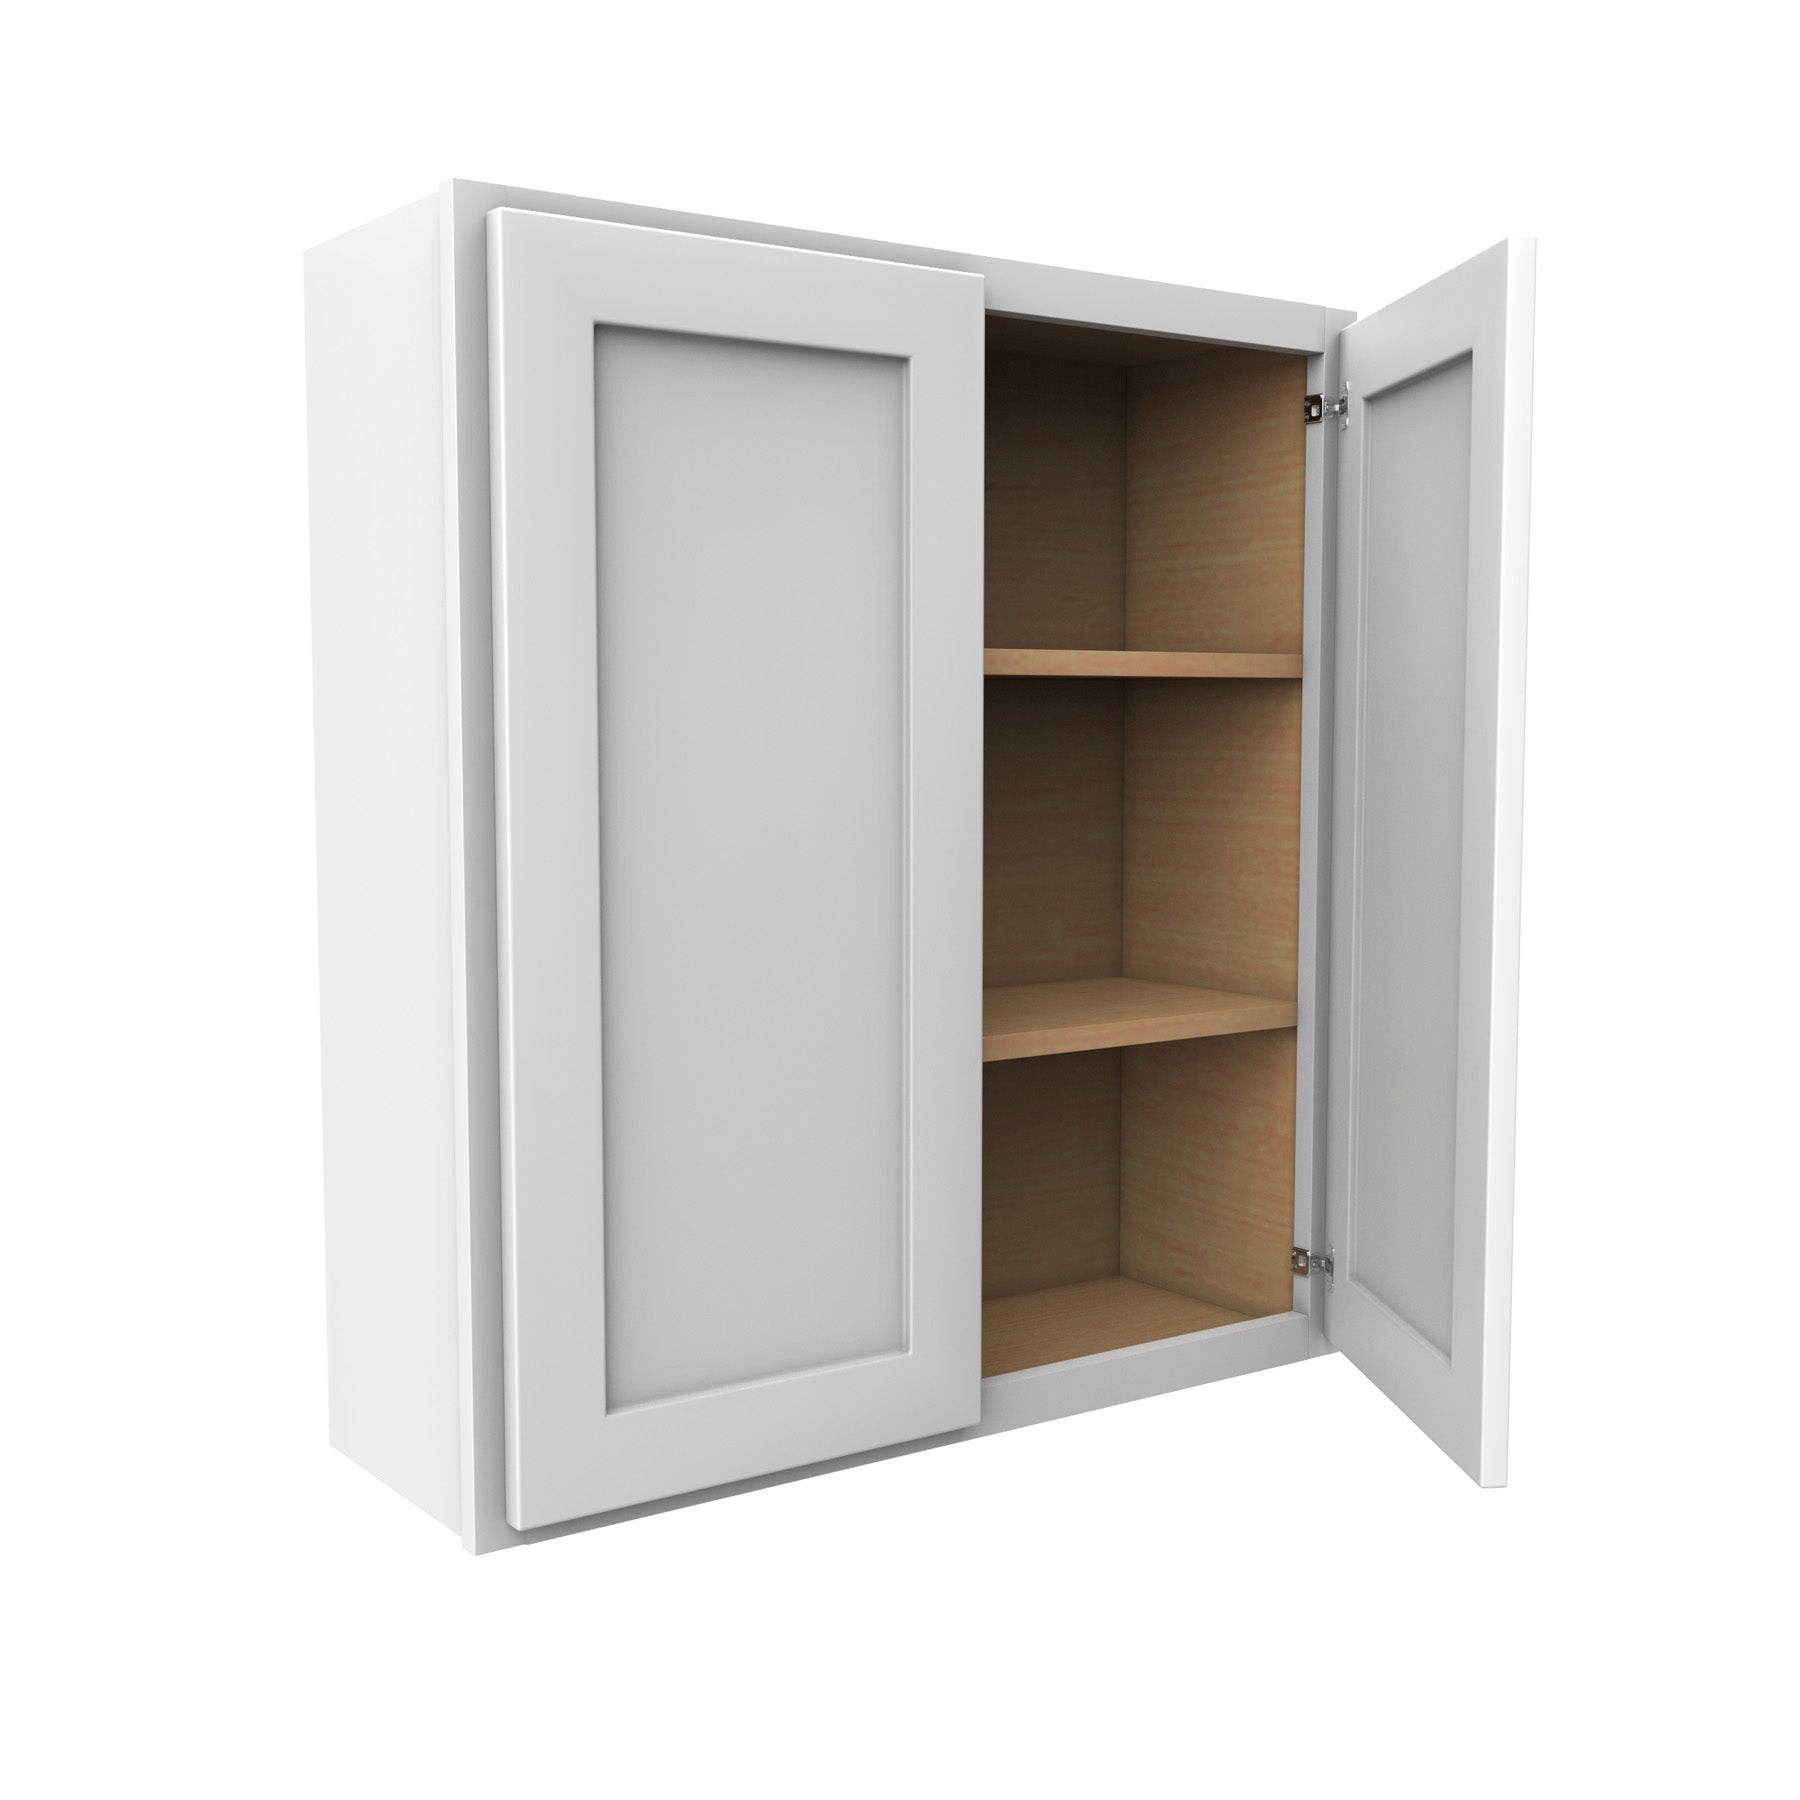 36 Inch High Double Door Wall Cabinet - Luxor White Shaker - Ready To Assemble, 33"W x 36"H x 12"D